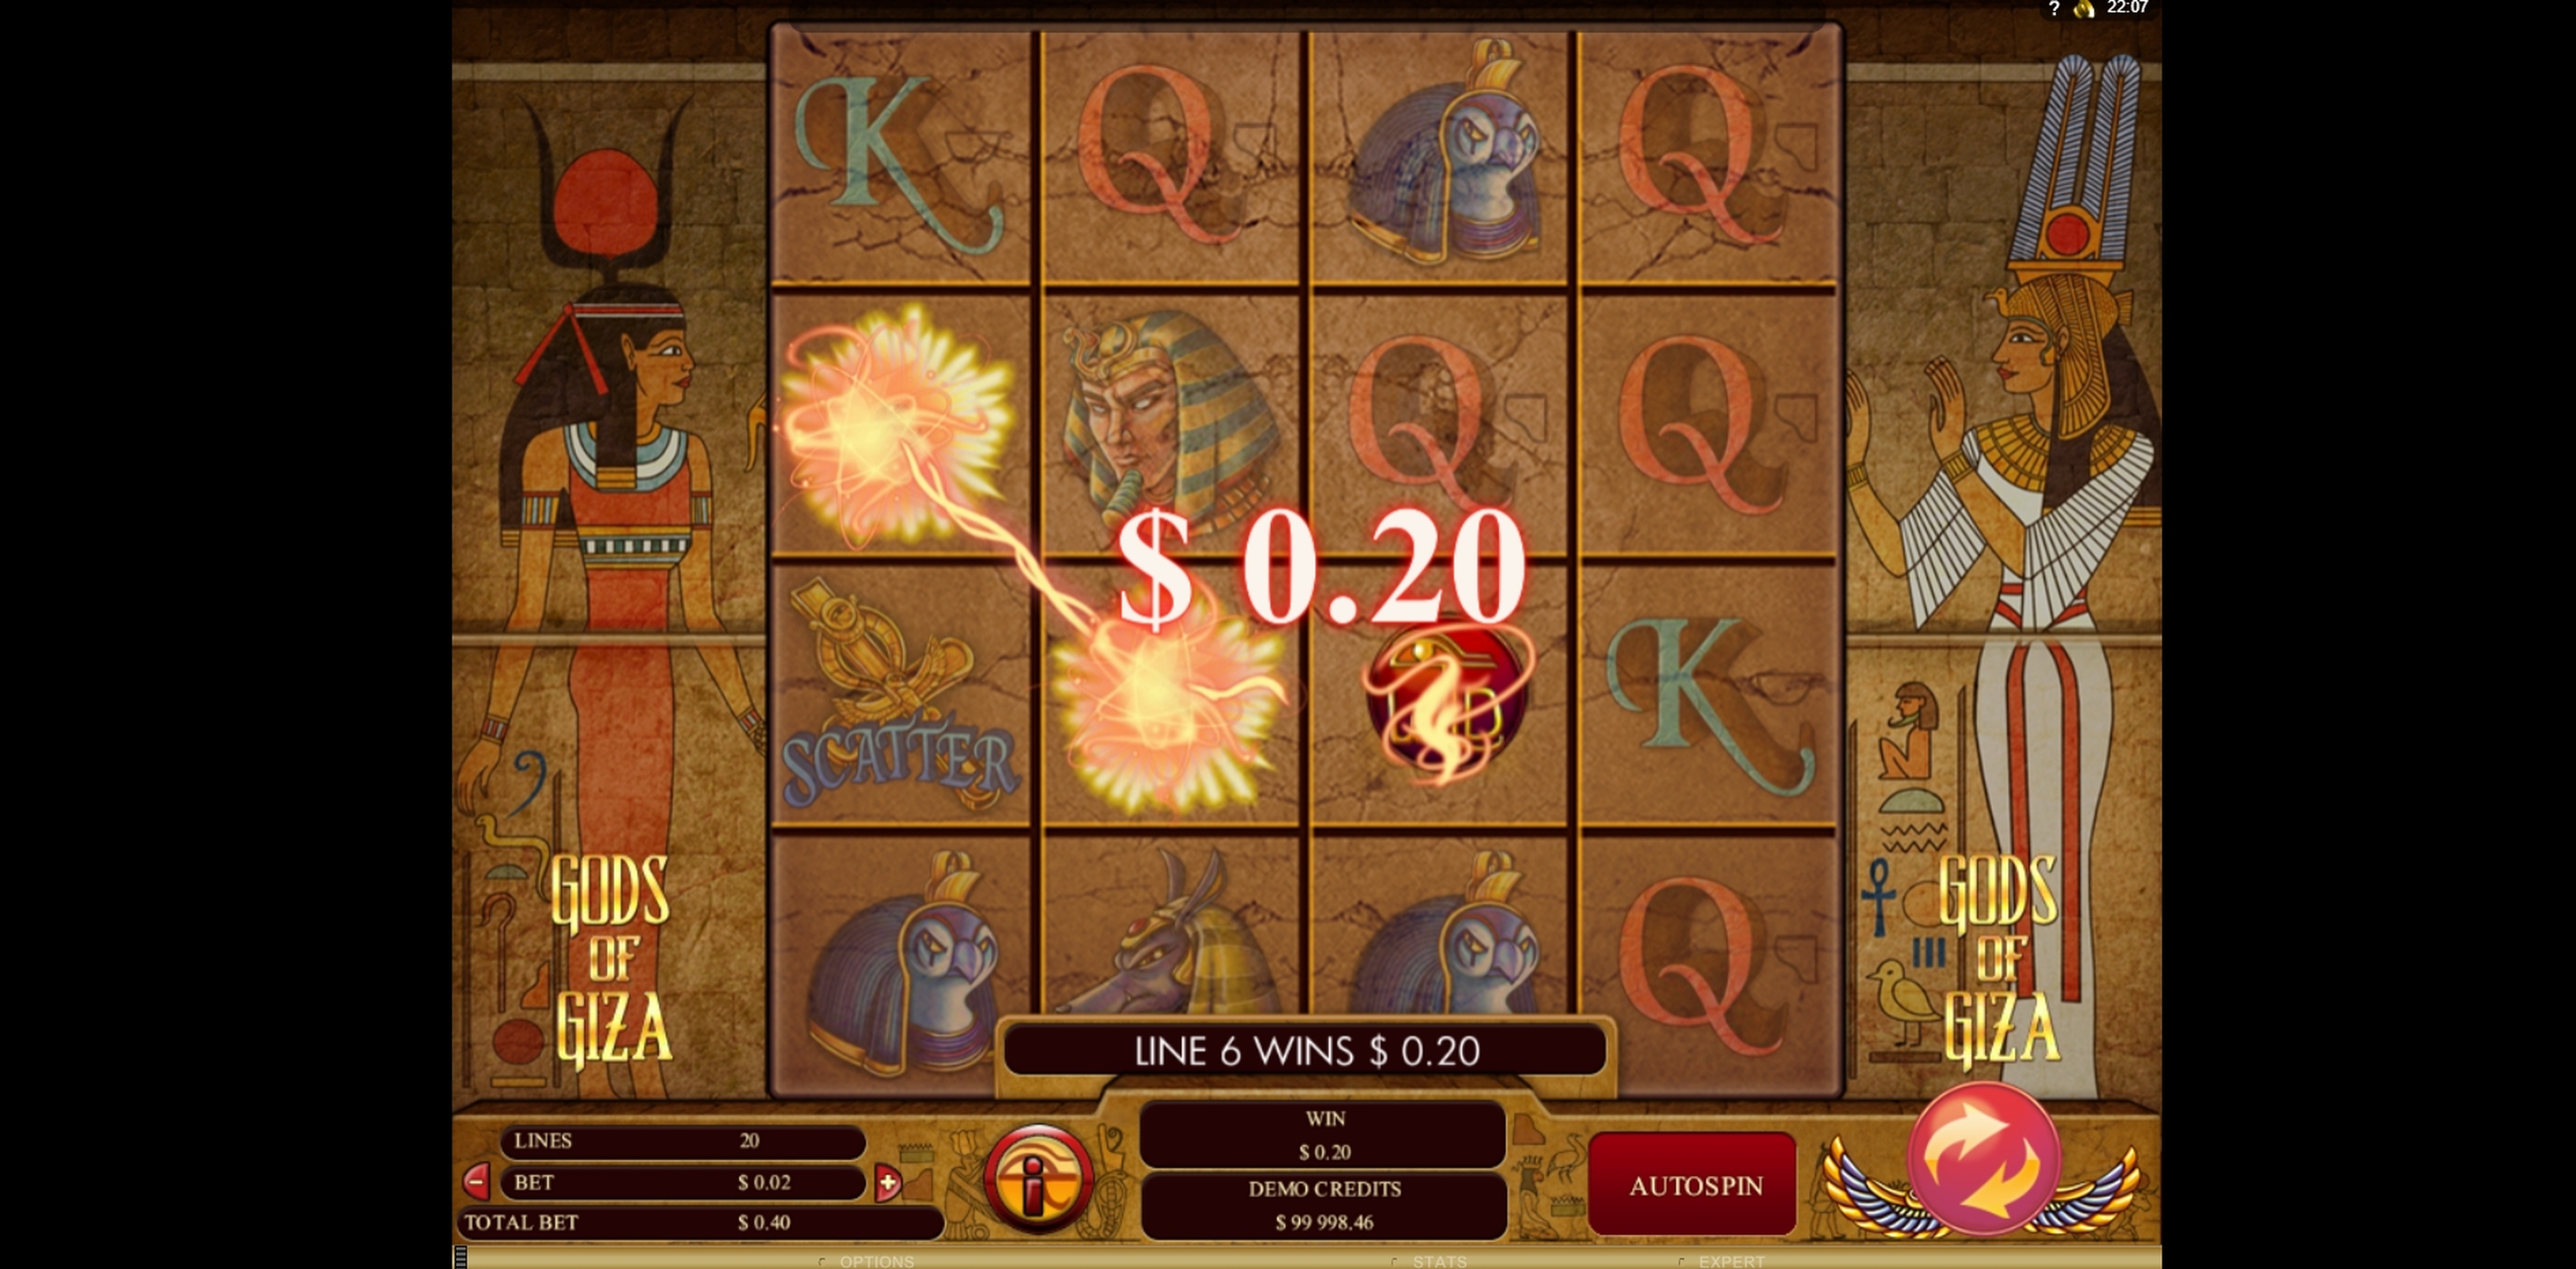 Win Money in Gods of Giza Free Slot Game by Genesis Gaming